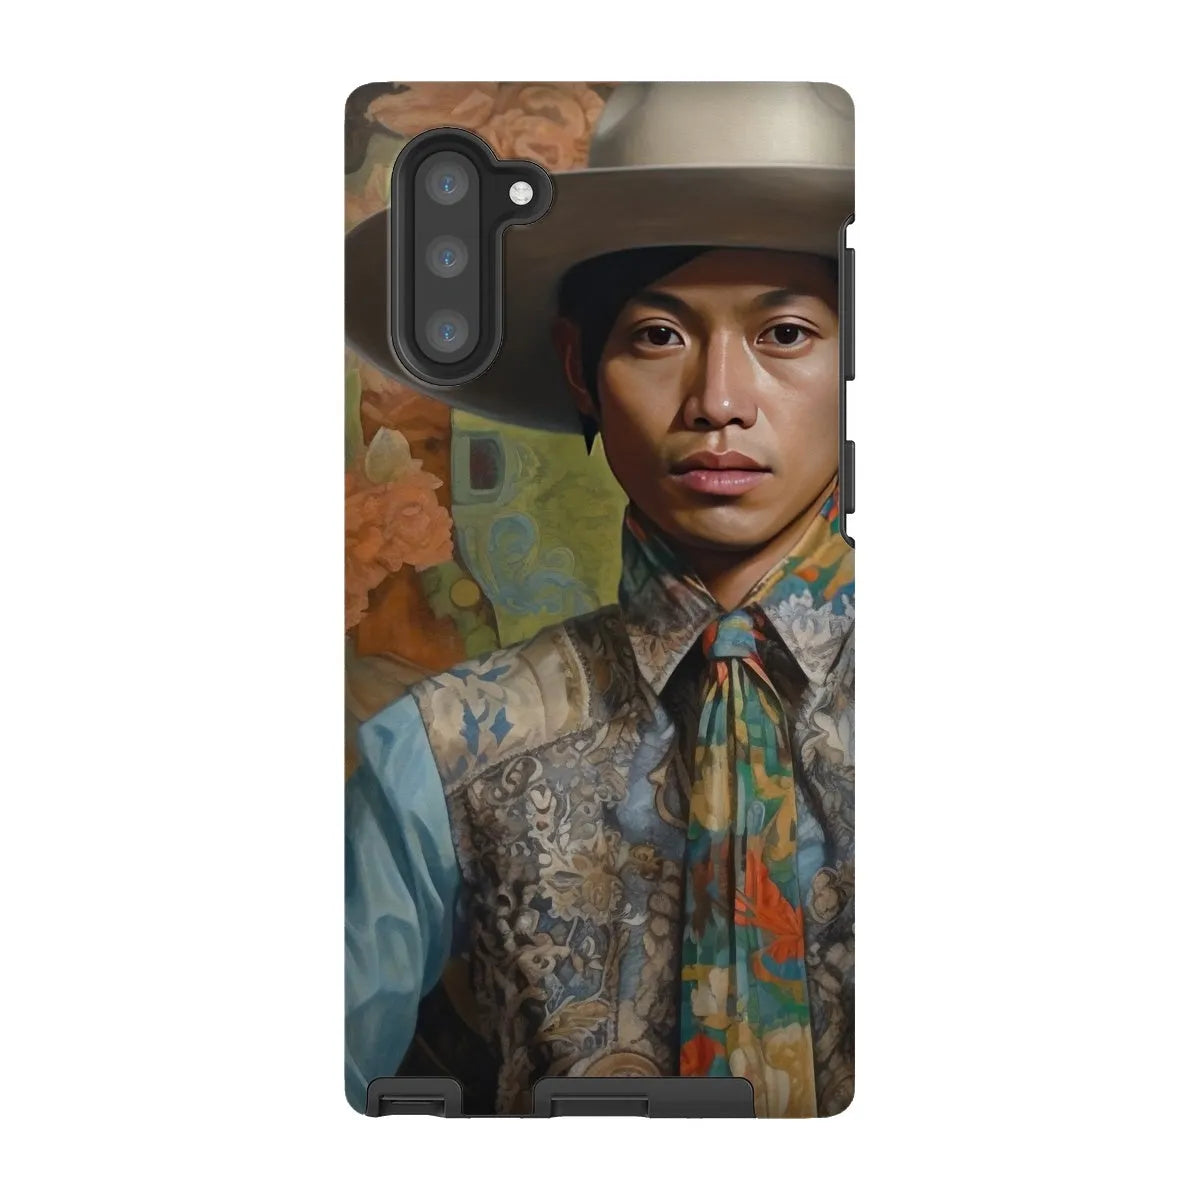 Junada The Gay Cowboy - Dandy Gay Aesthetic Art Phone Case - Samsung Galaxy Note 10 / Matte - Mobile Phone Cases